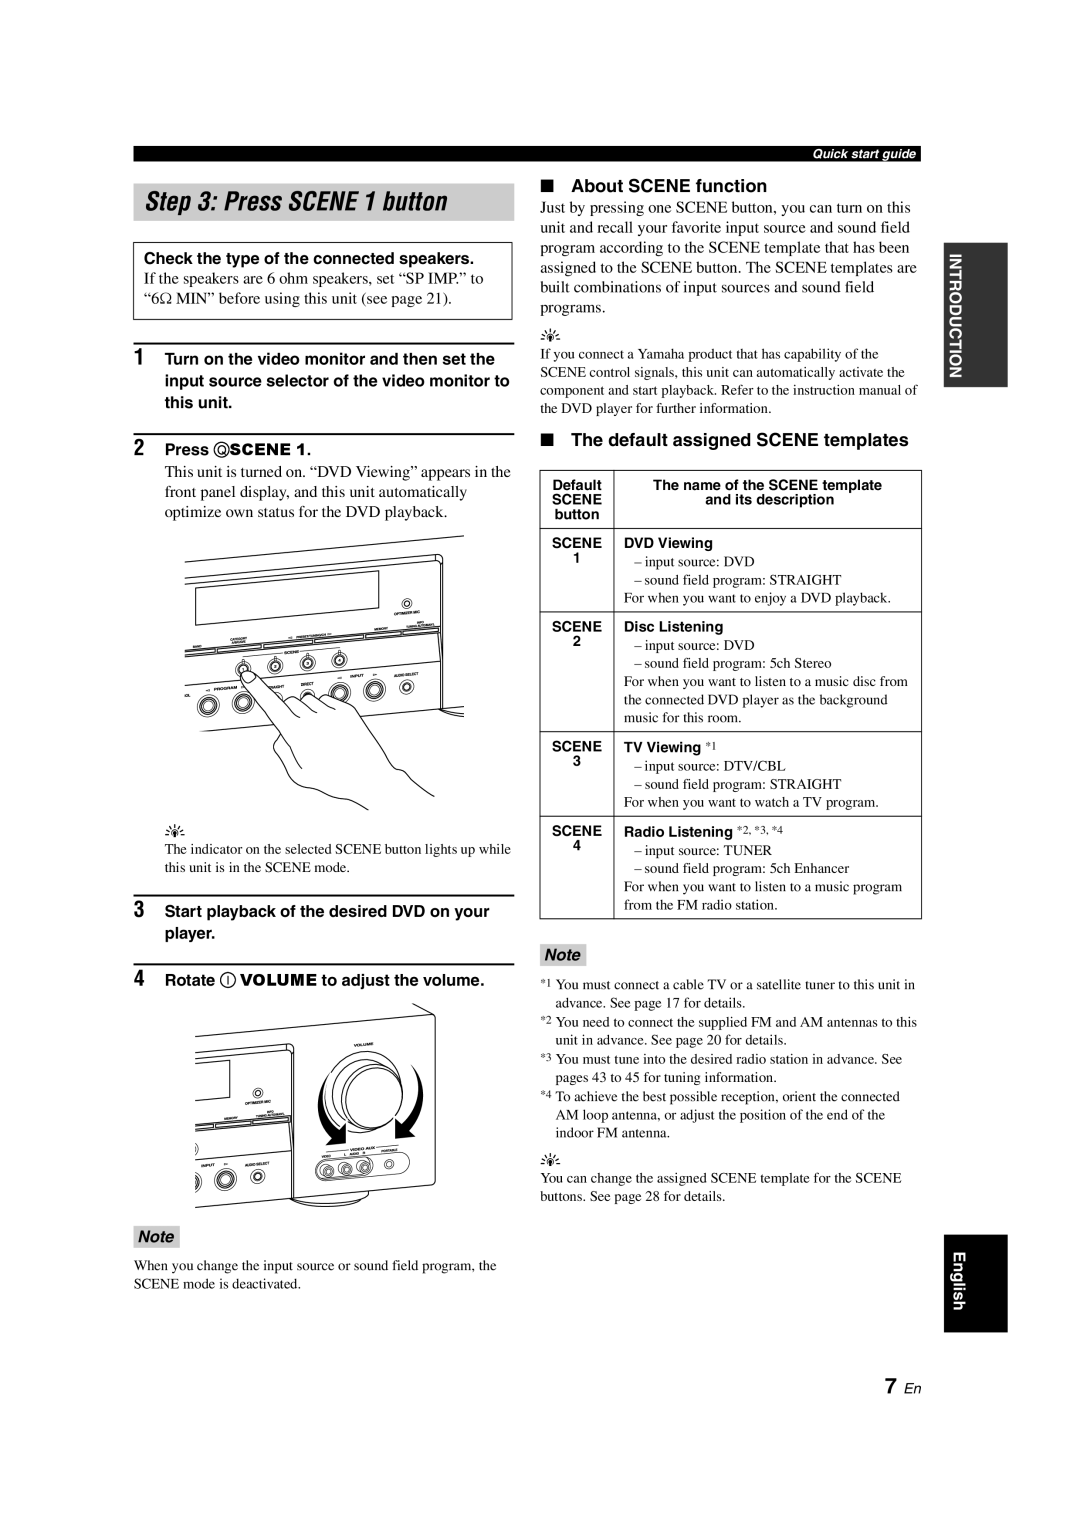 Yamaha RX-V463 owner manual 7 En, About SCENE function, The default assigned SCENE templates, Press SCENE 1 button 